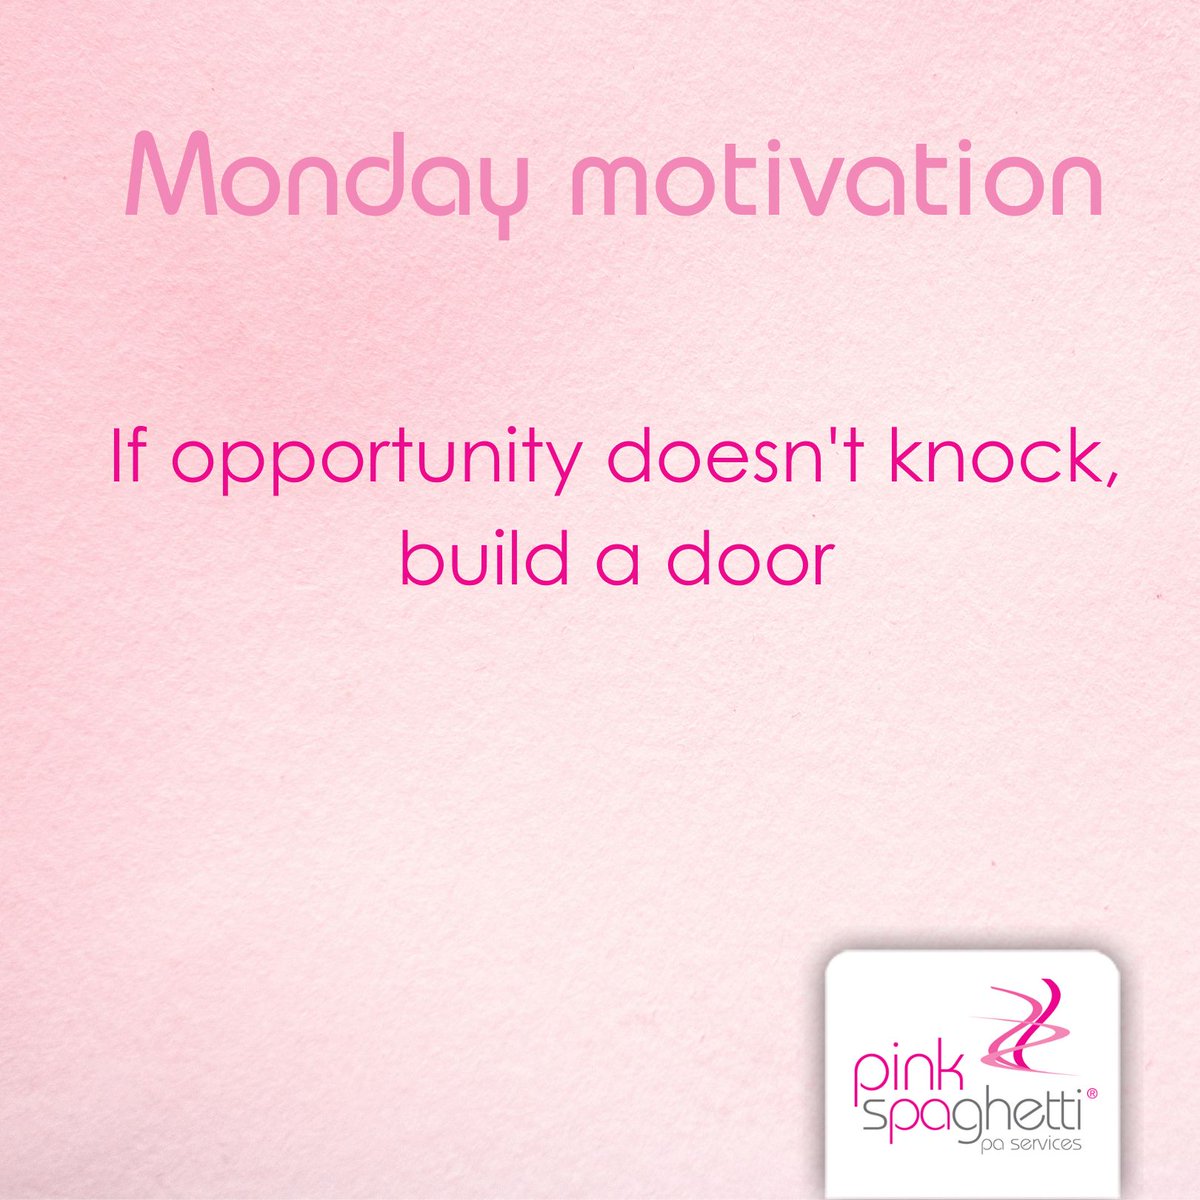 It’s Monday and we hope lots of opportunities come your way this week.

#VirtualAssistants #MondayMotivation #NewWeek #SmallBusinessLife